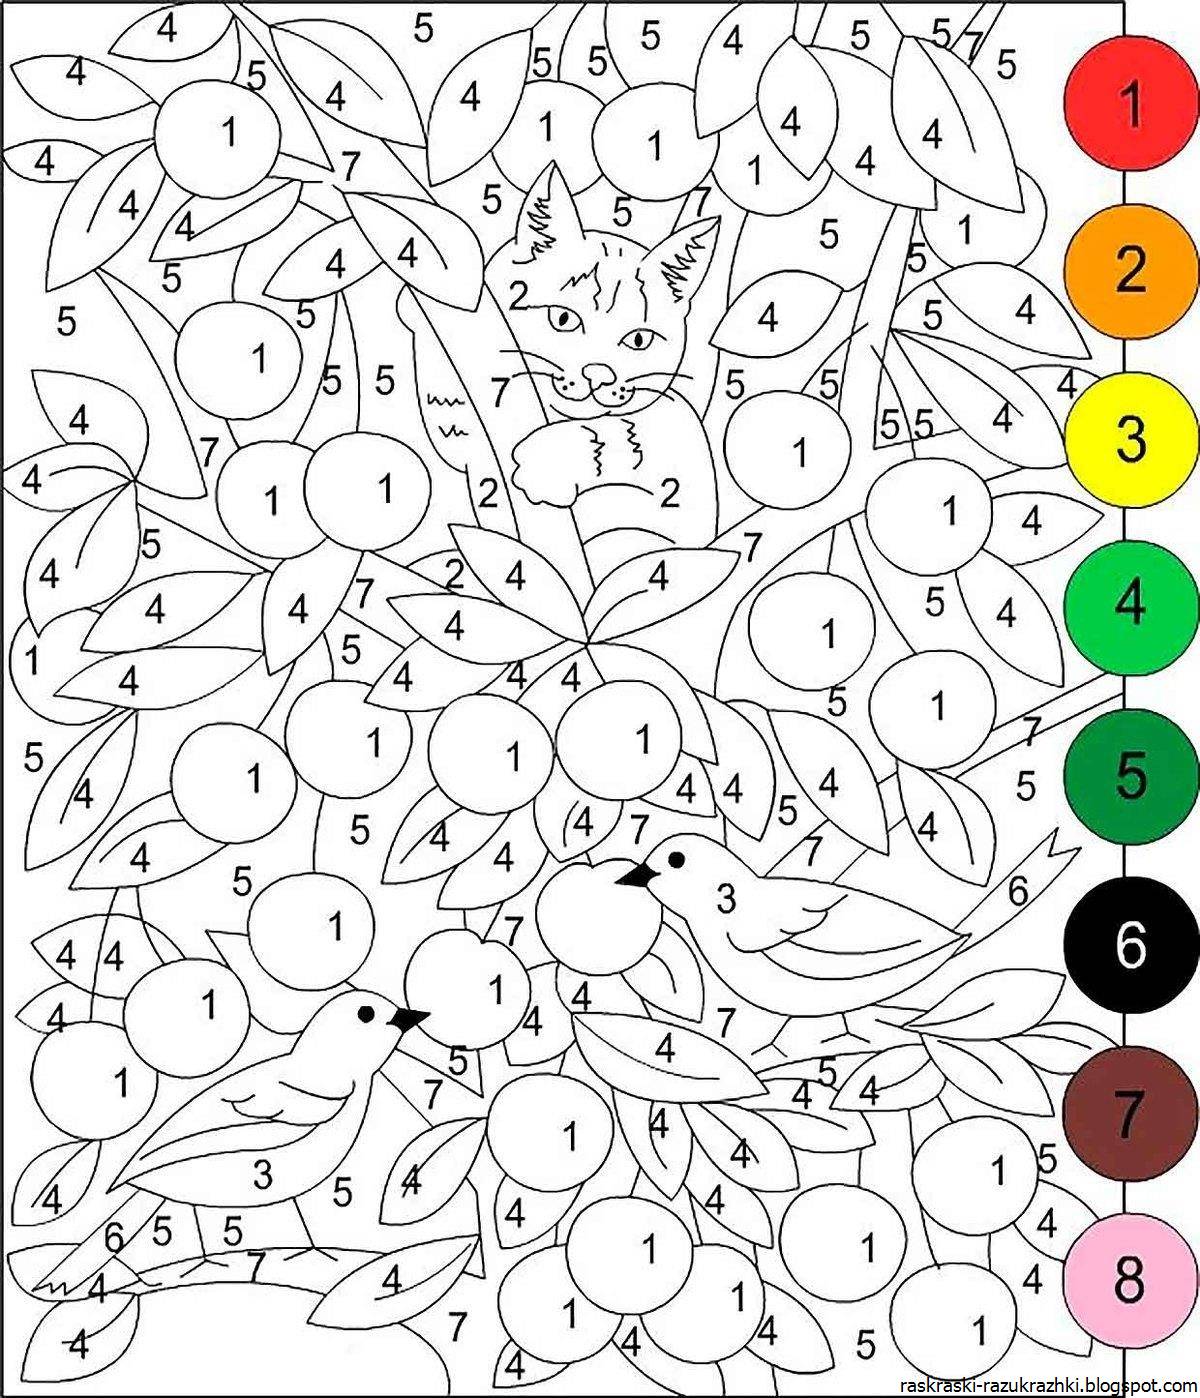 Colour-by-number coloring to stimulate color